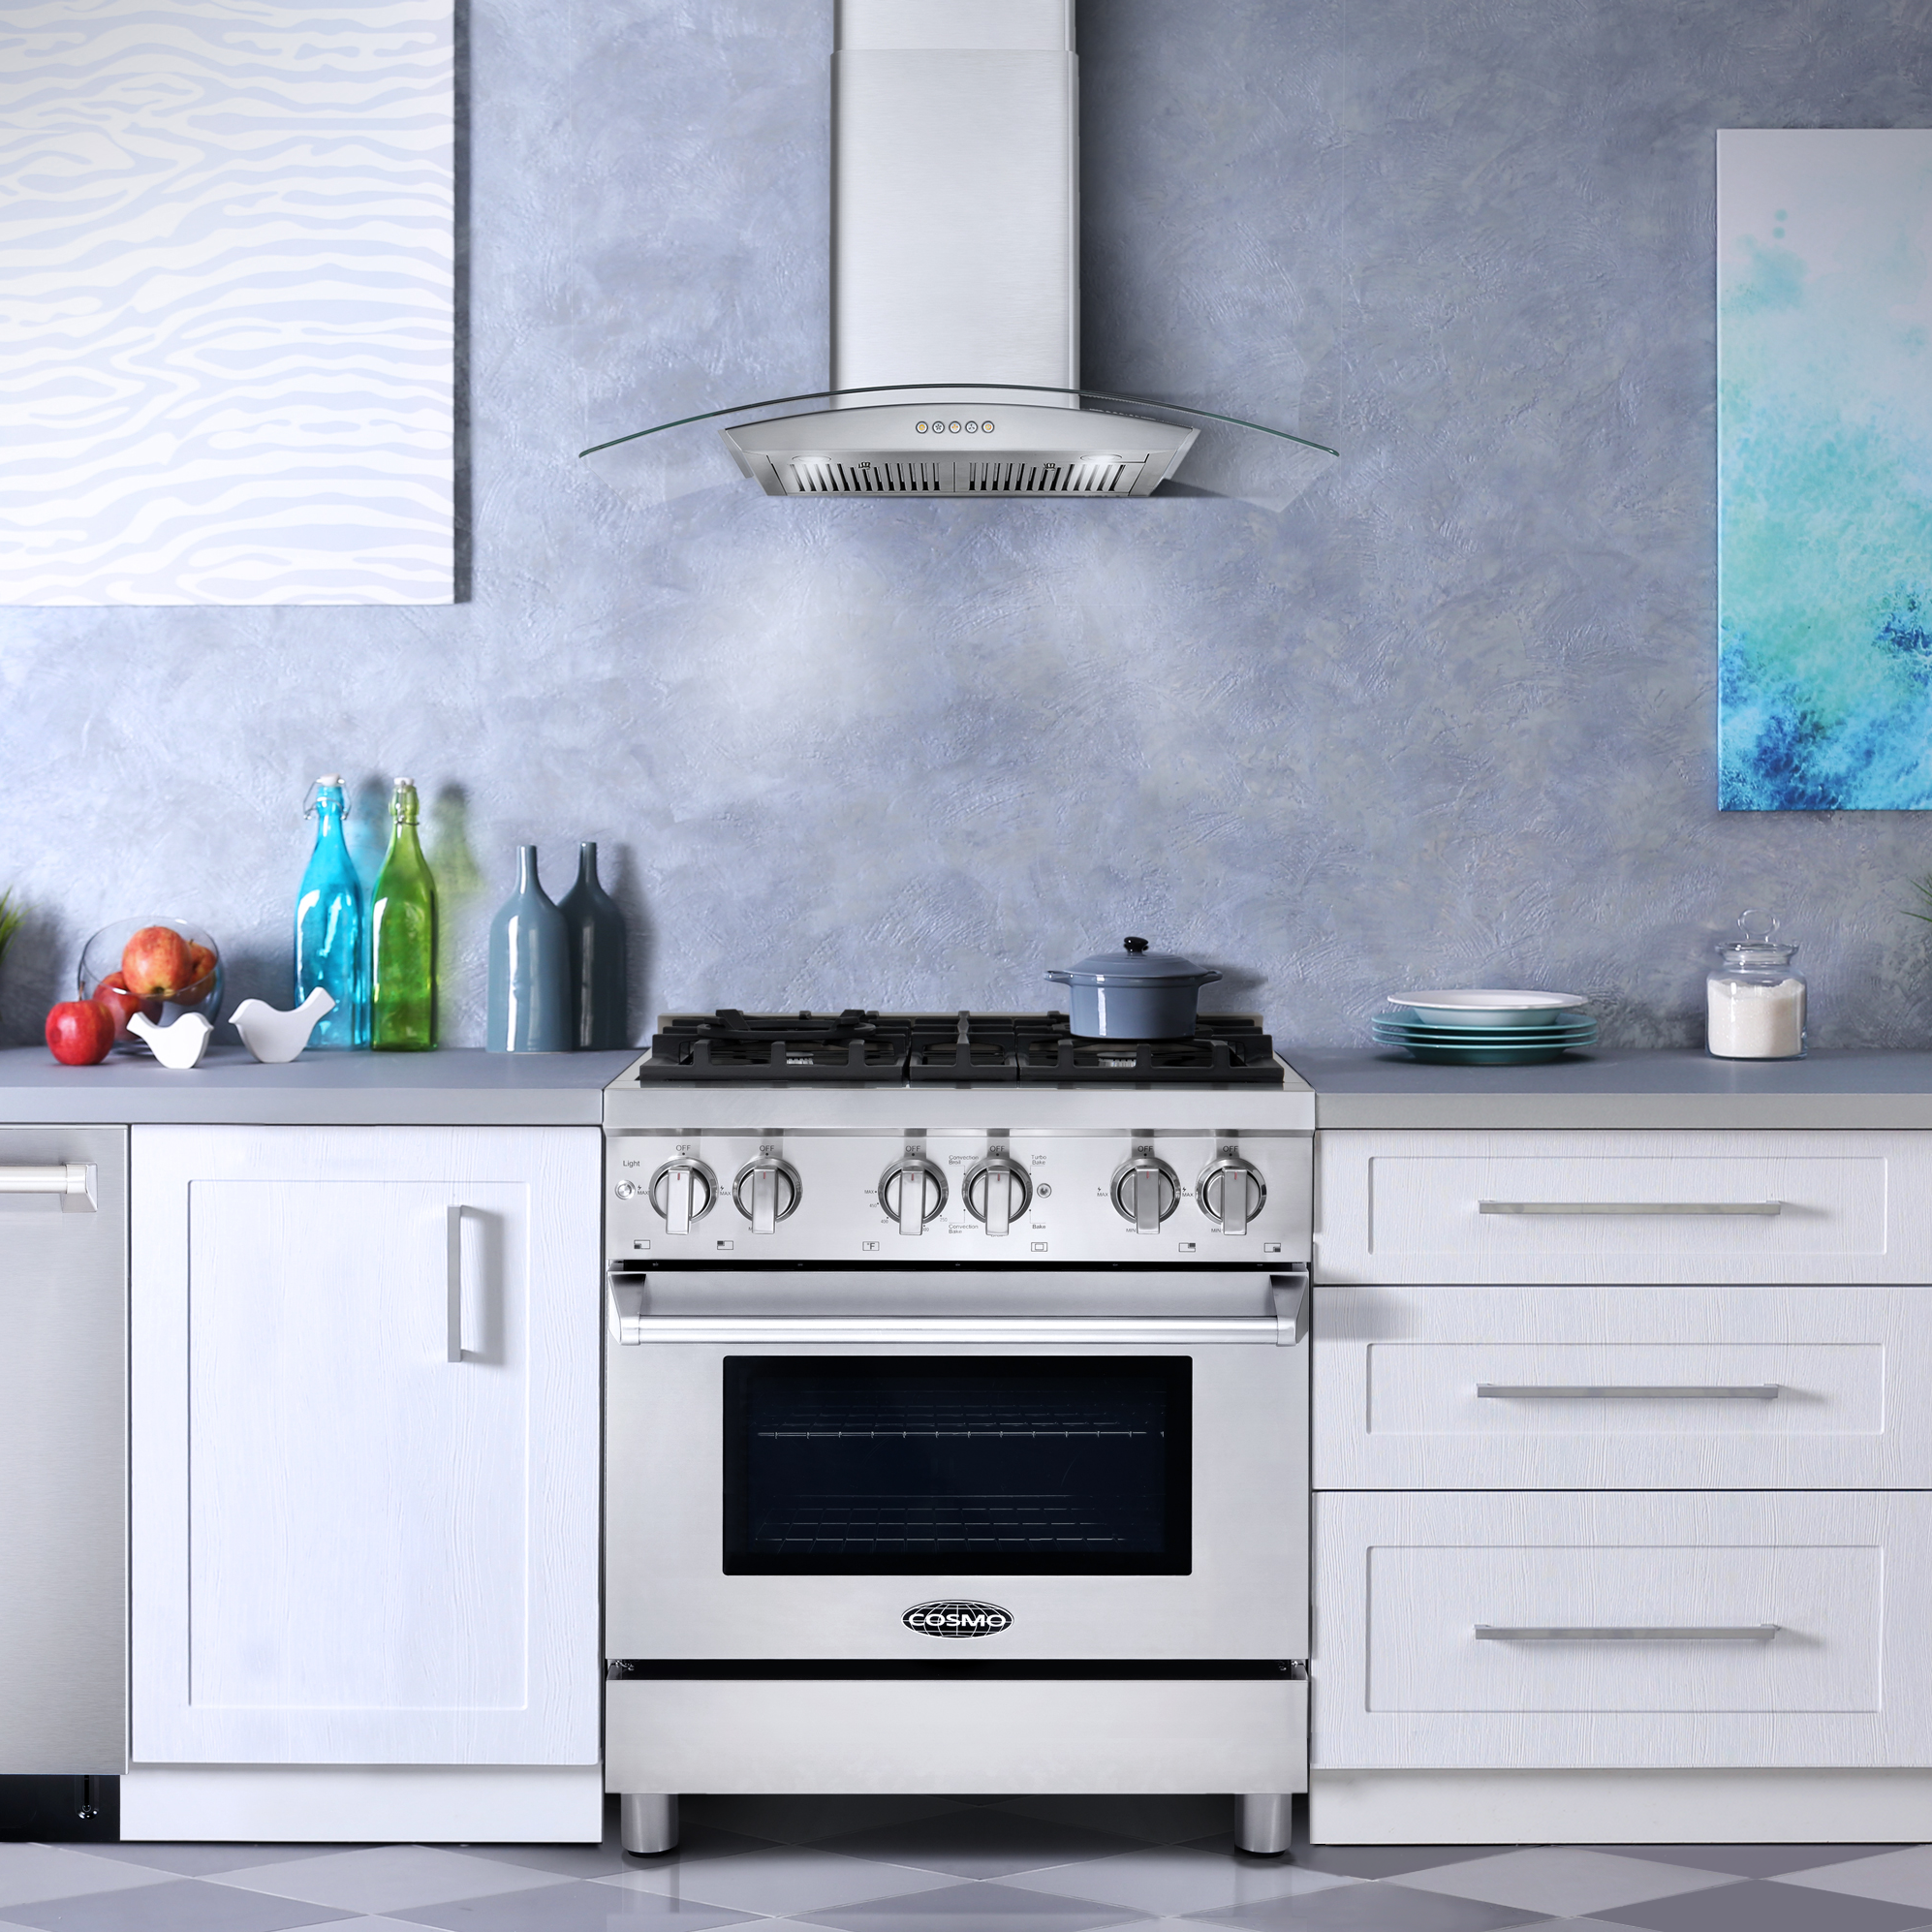 Appliances You Should Upgrade Before Selling Your Home